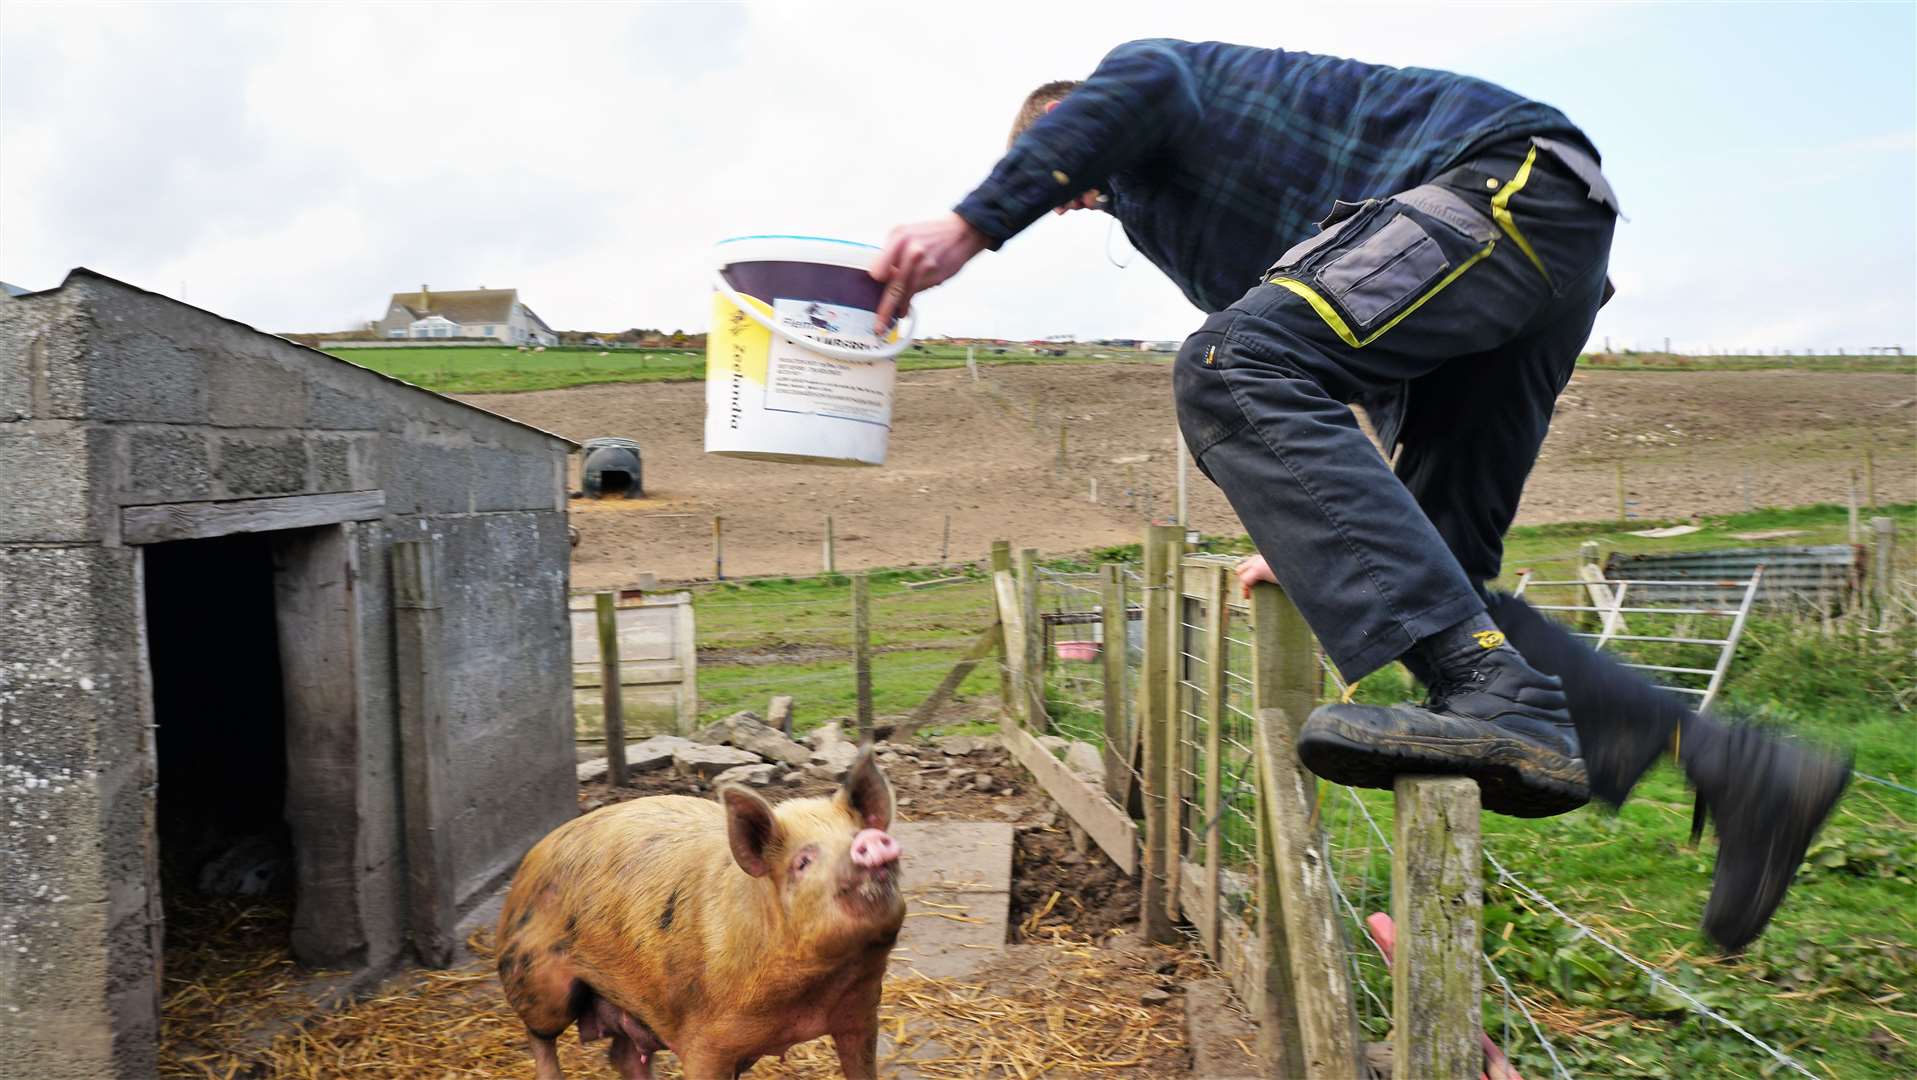 Alan's son Leon jumps into action to feed the hungry pigs. Picture: DGS